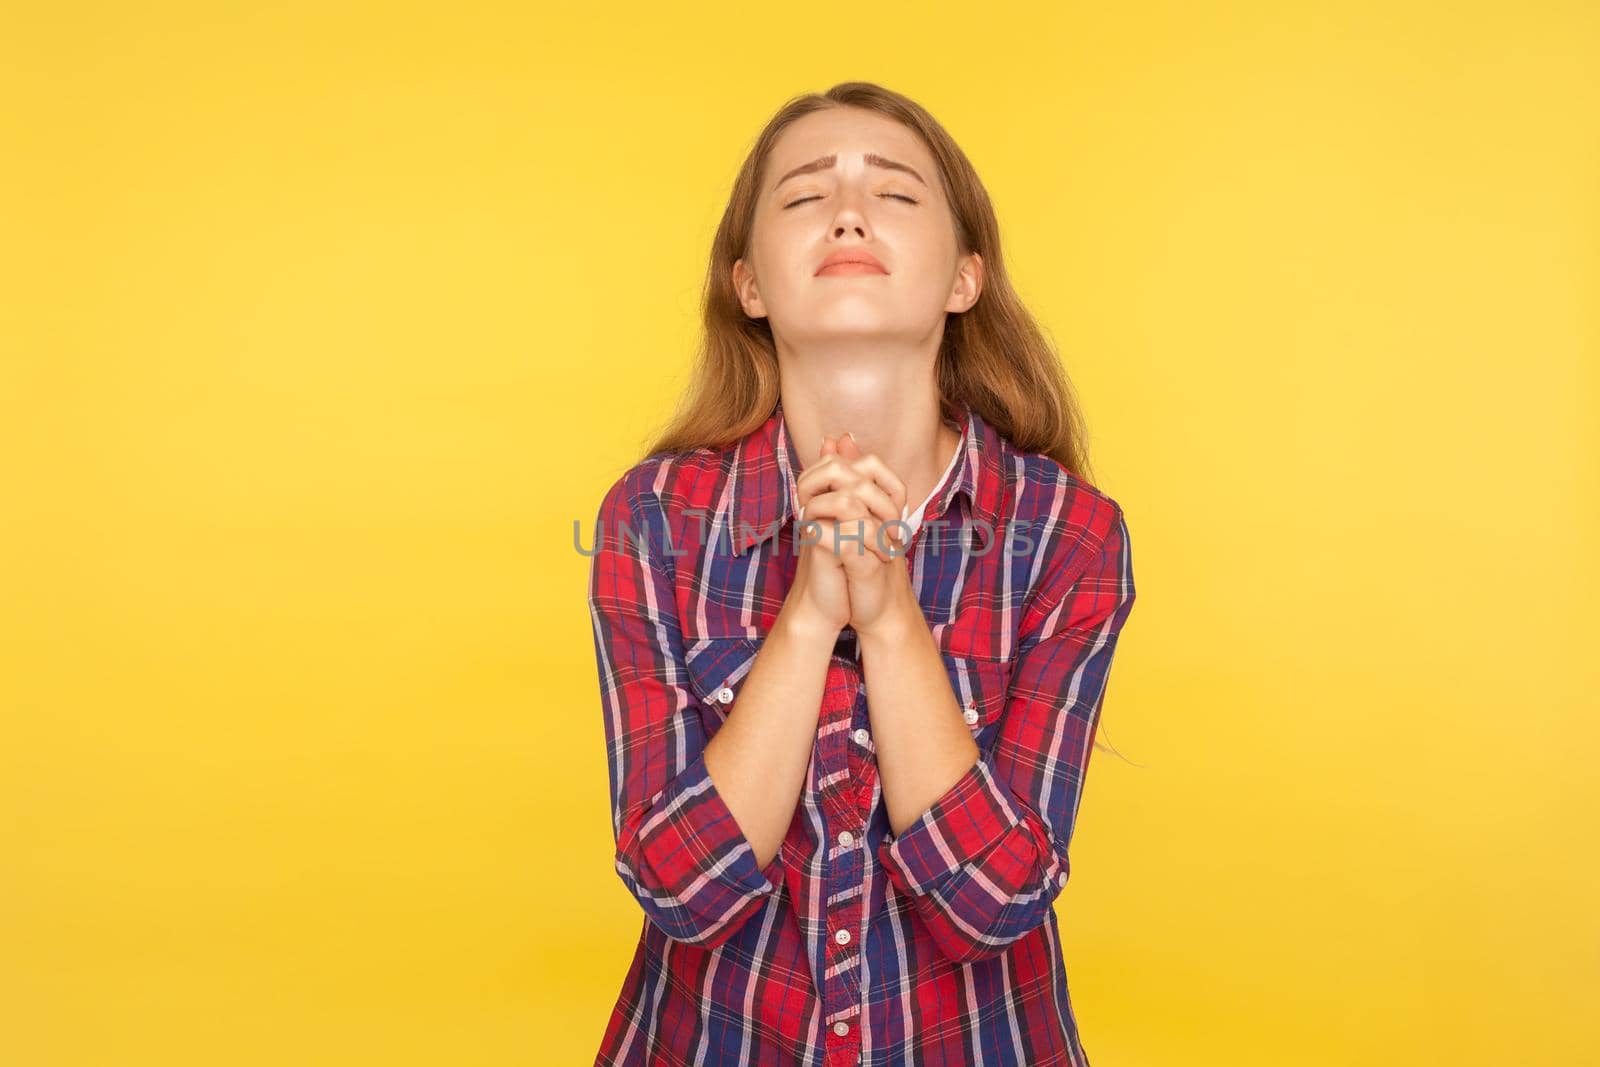 Please I'm begging. Portrait of despaired ginger girl in shirt keeping arms in prayer gesture and holding up head, appealing to god with imploring expression. studio shot isolated on yellow background